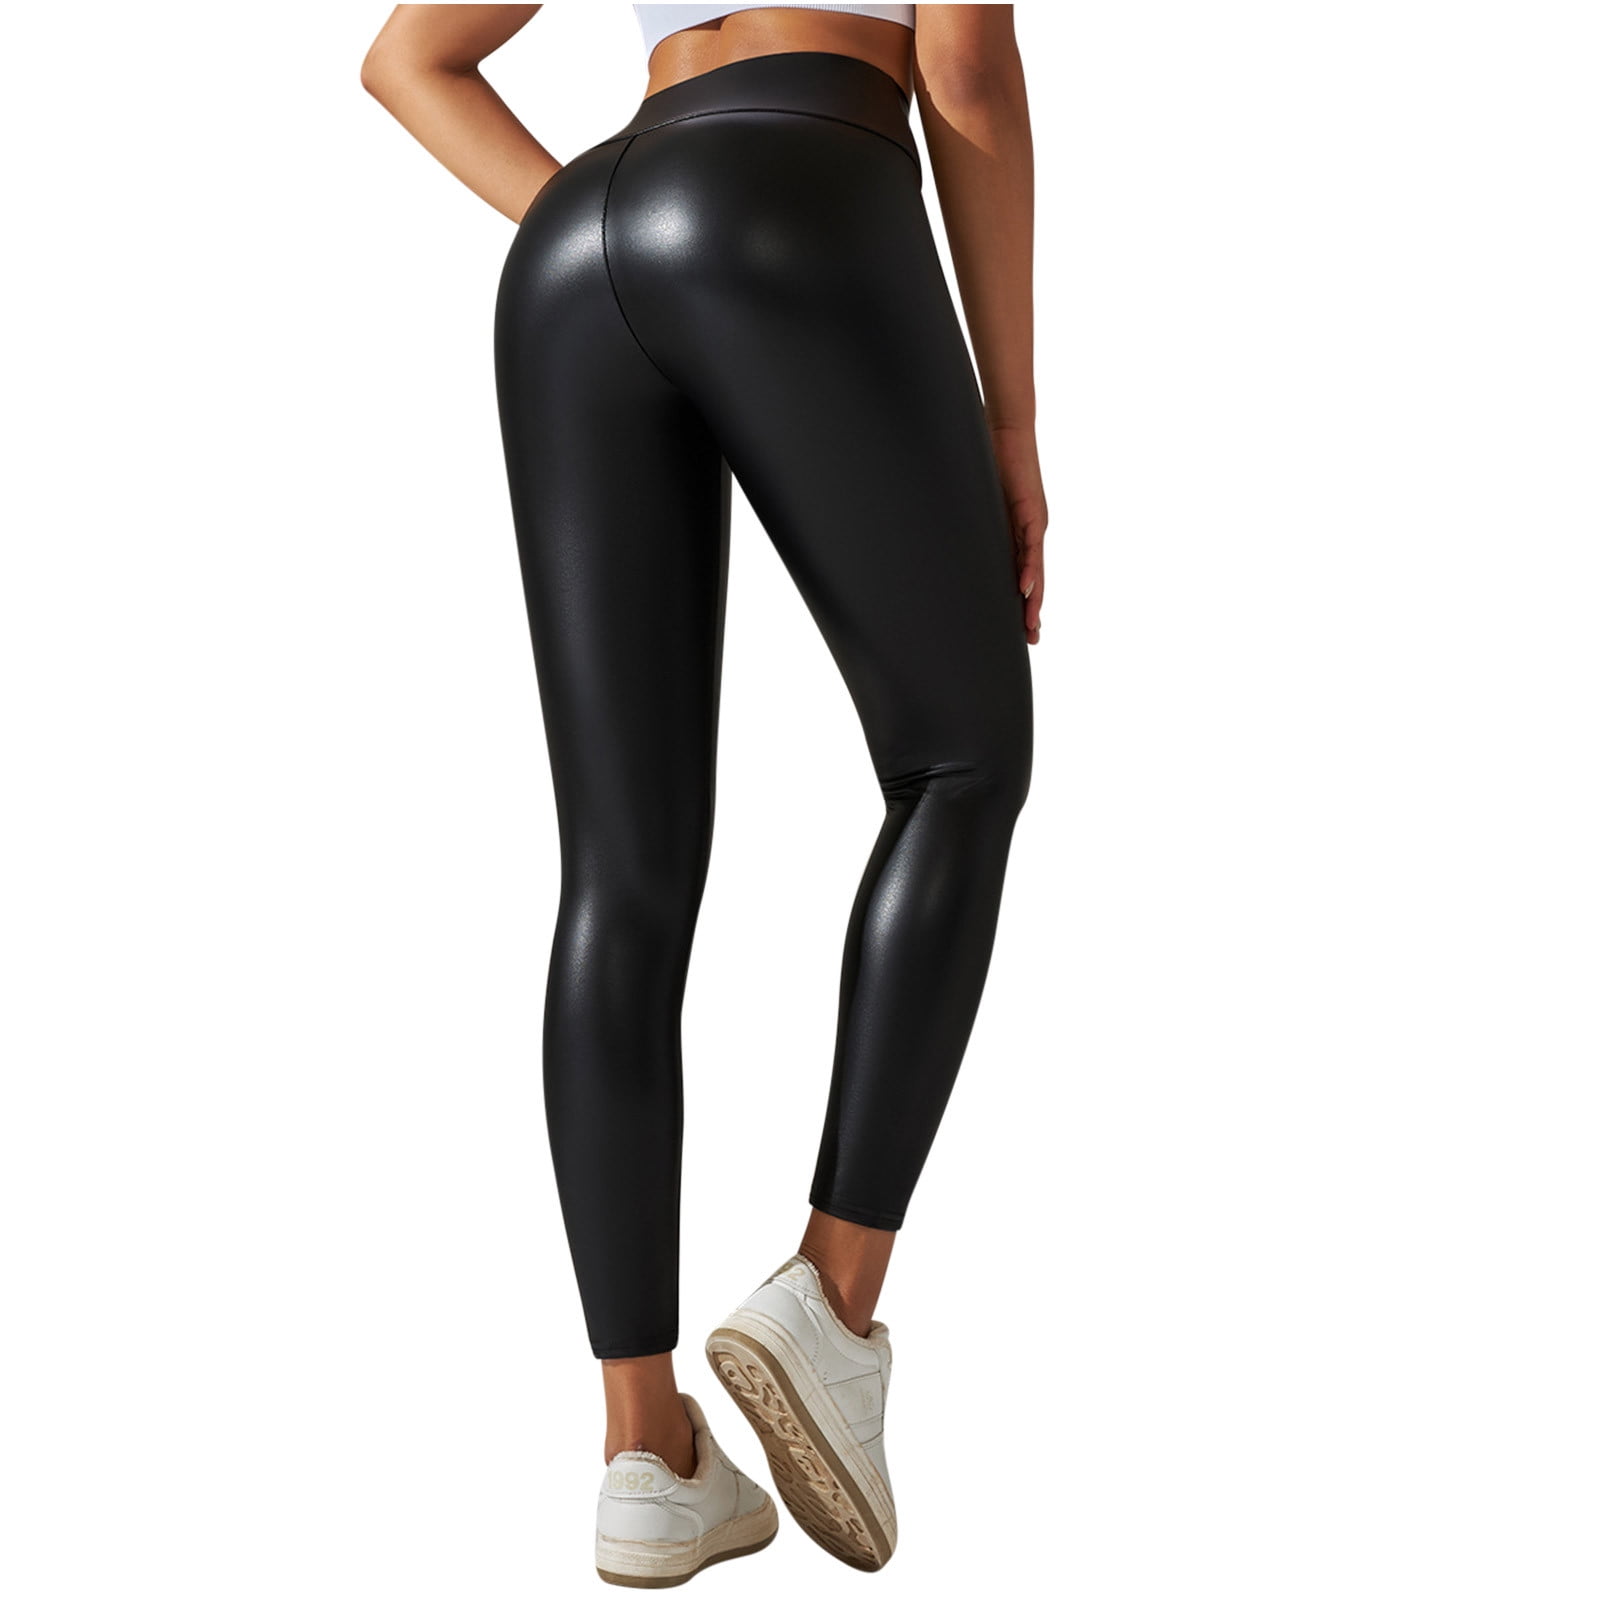 Girls Leather Leggings With Velvet Jeggings Lining Slim Fit For Winter  Sizes 2 6 Years From Weiikeii, $6.8